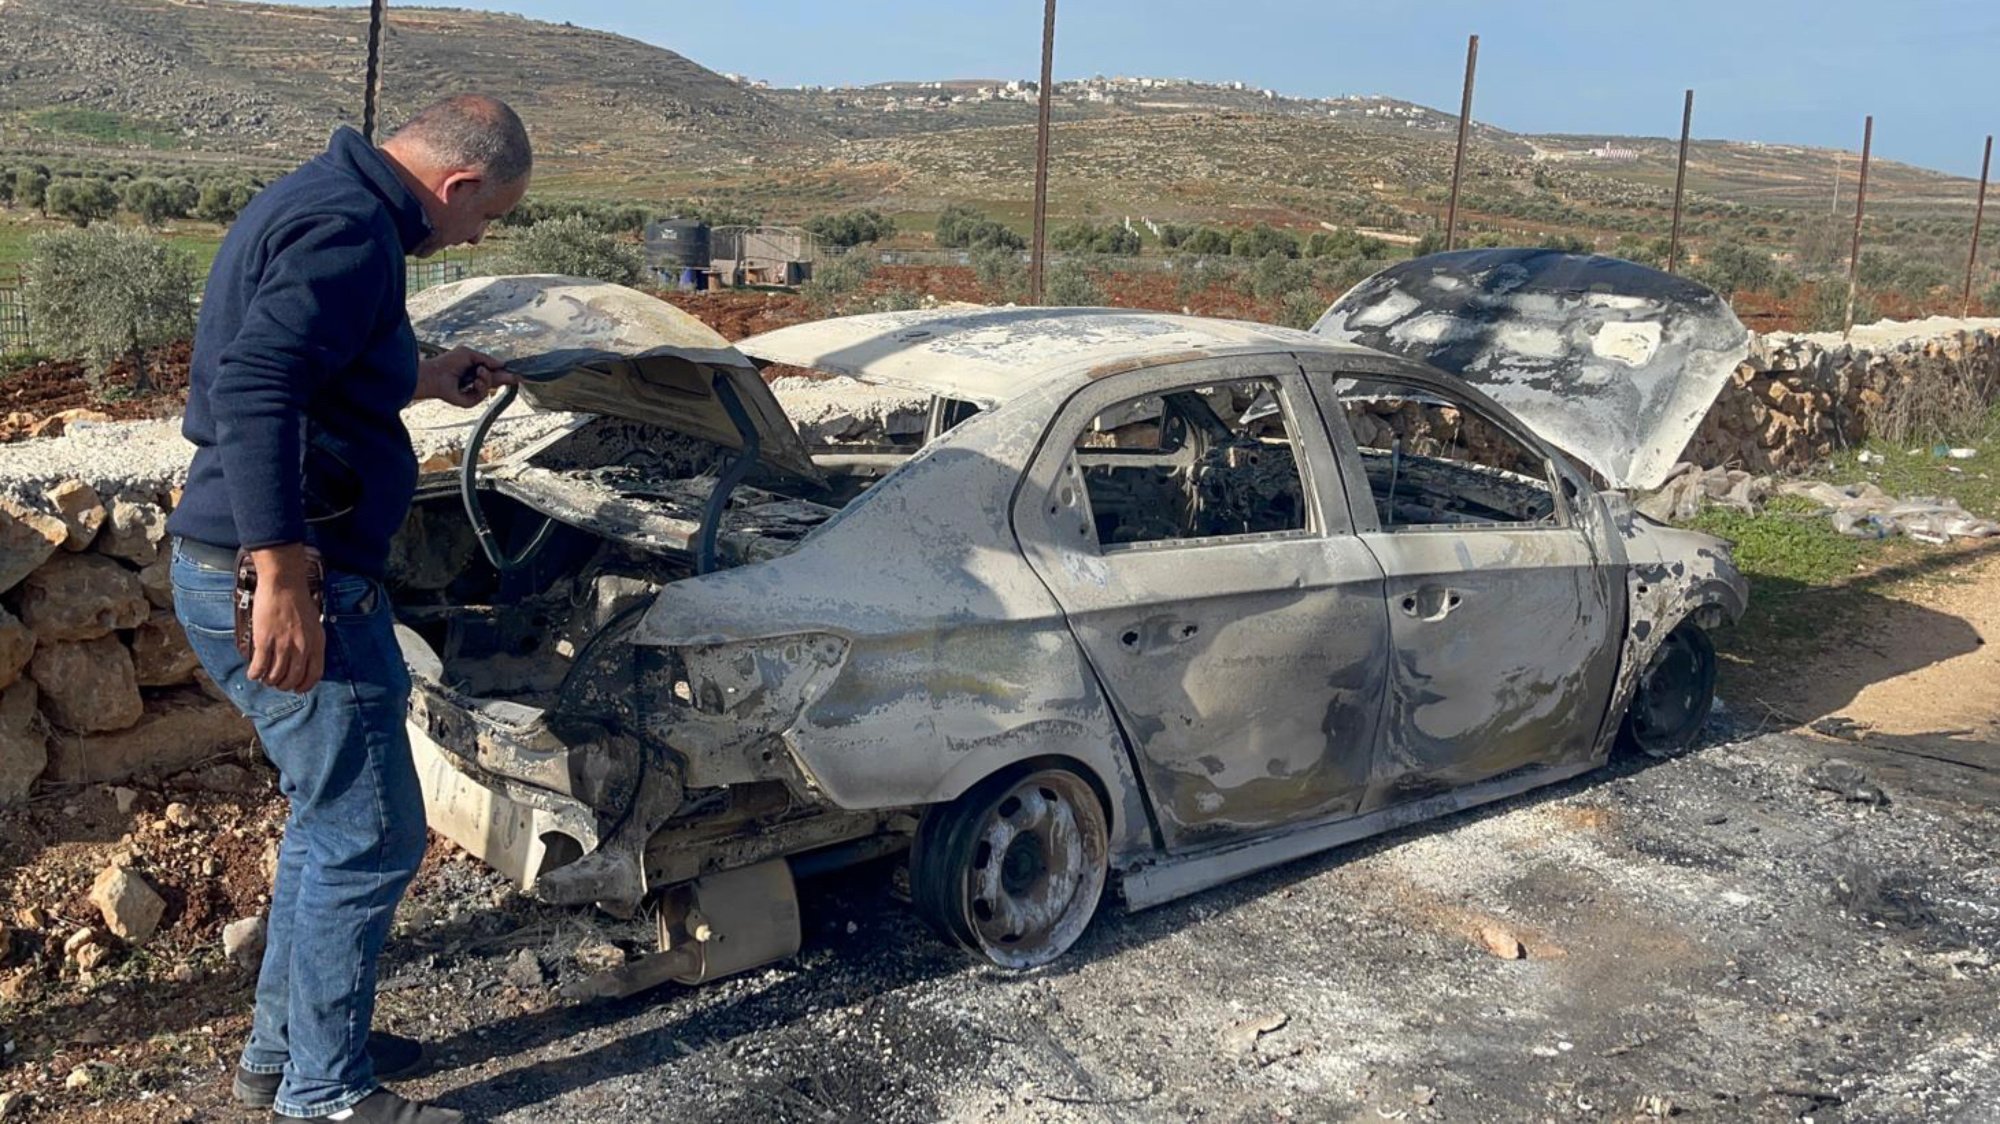 A Palestinian inspects a car that was vandalised by Israeli settlers in the Palestinian village of Jalud, southeast of Nablus, 30 January 2023 (MEE/Amir Halmi Shaheen)